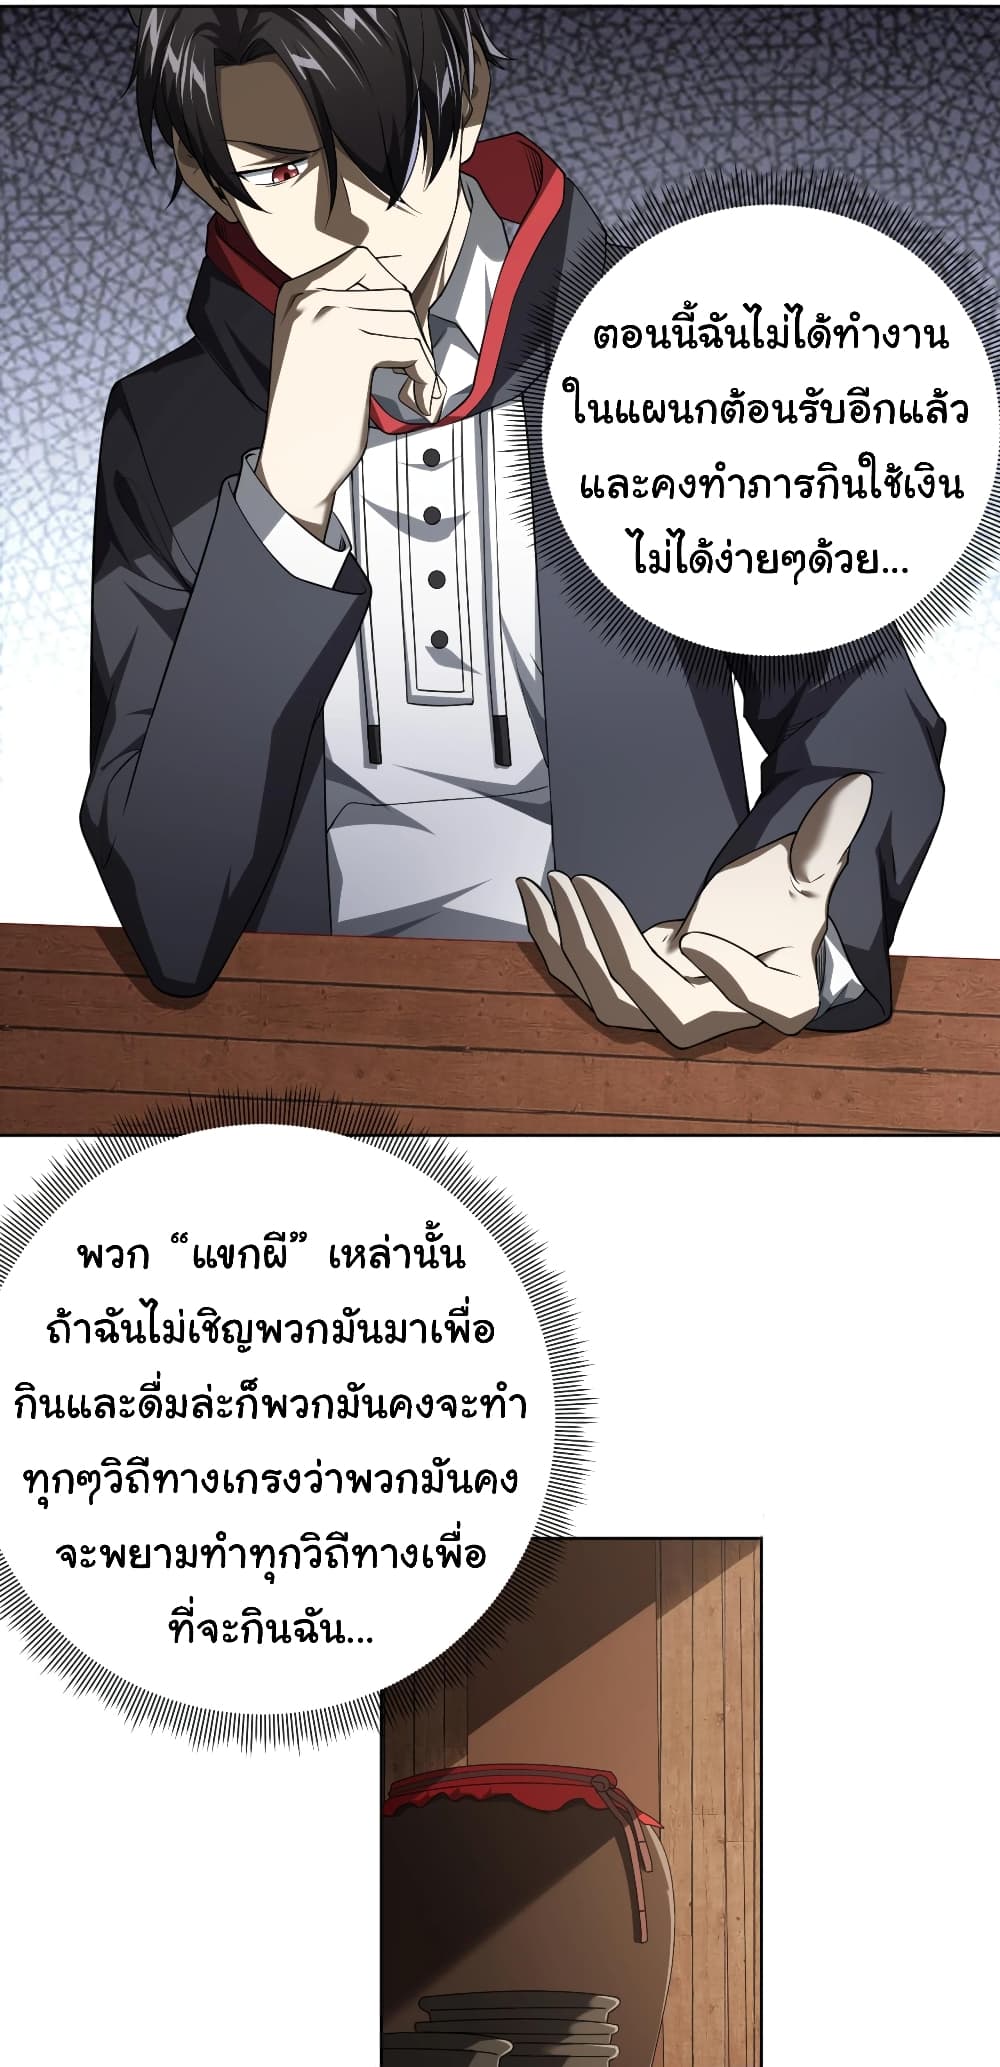 Start with Trillions of Coins ตอนที่ 5 (4)